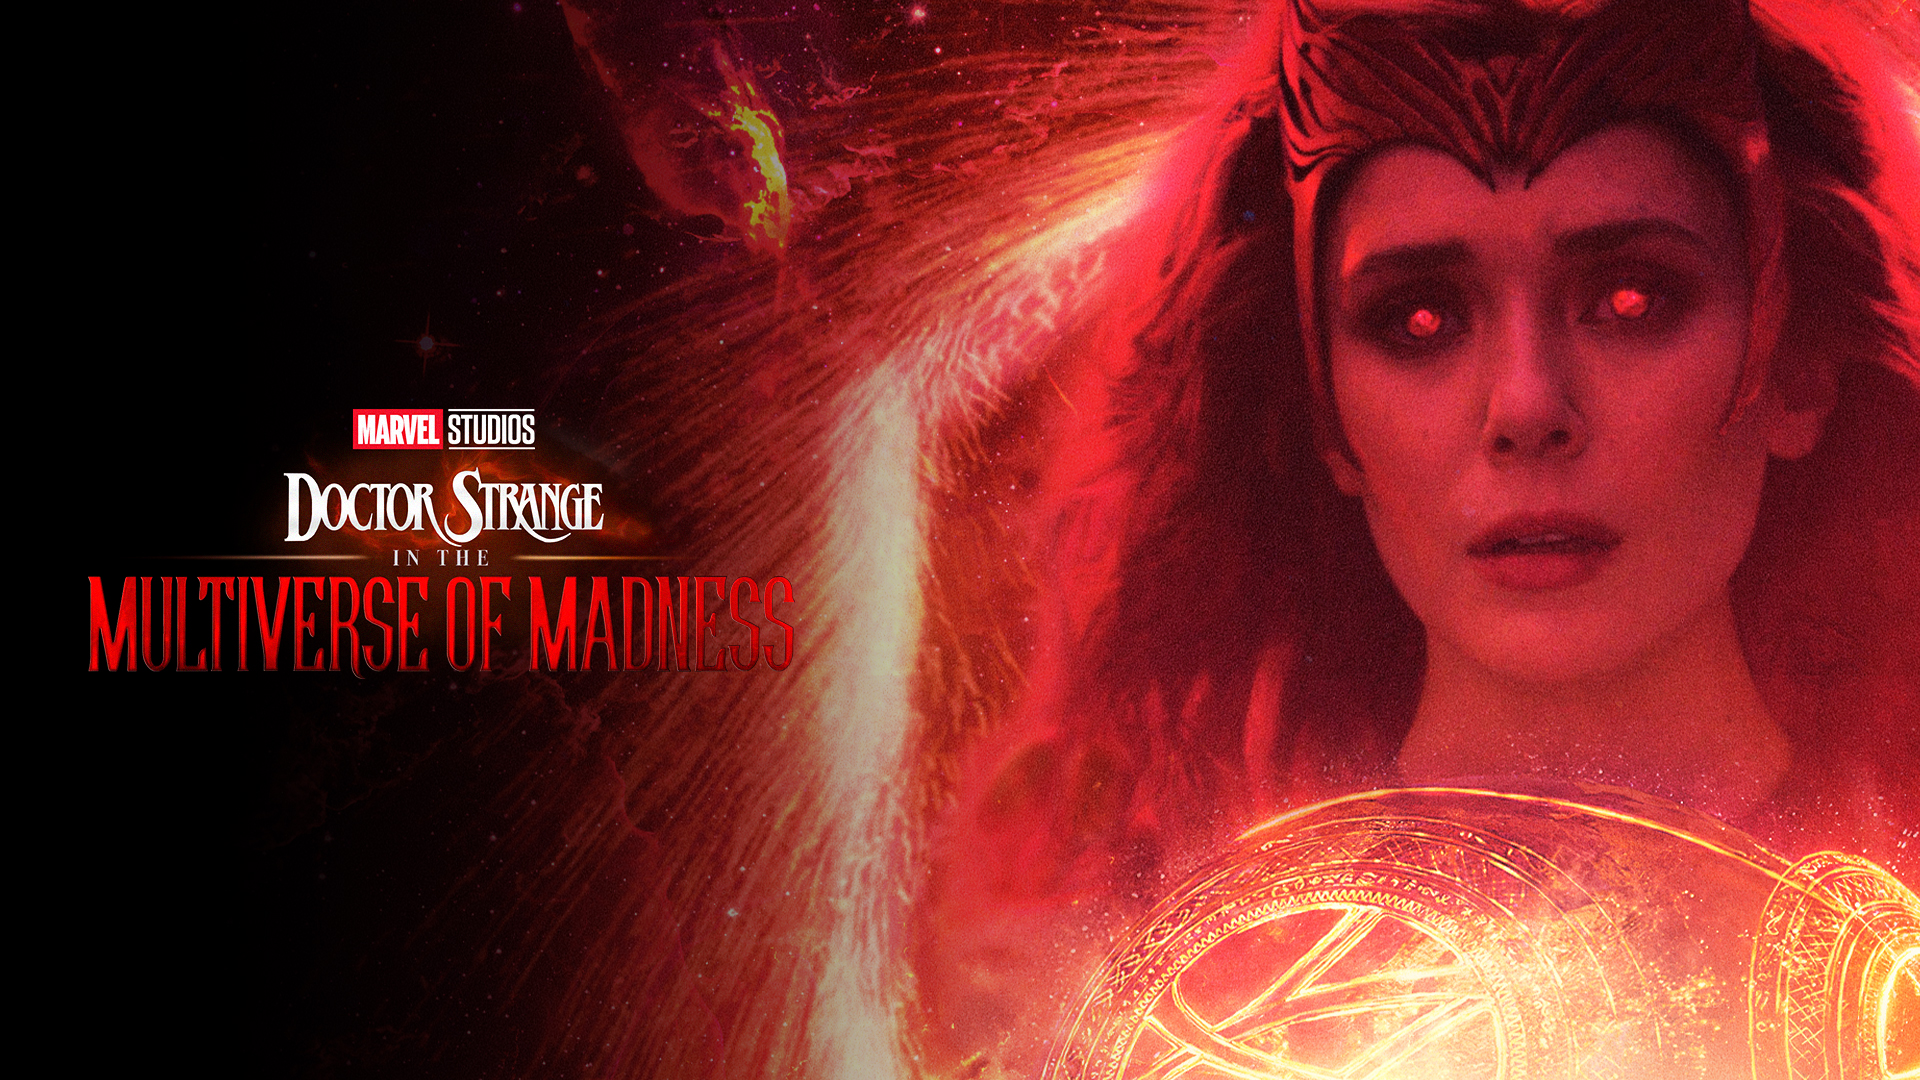 Scarlet Witch as the main villain in Doctor Strange in the Multiverse of Madness